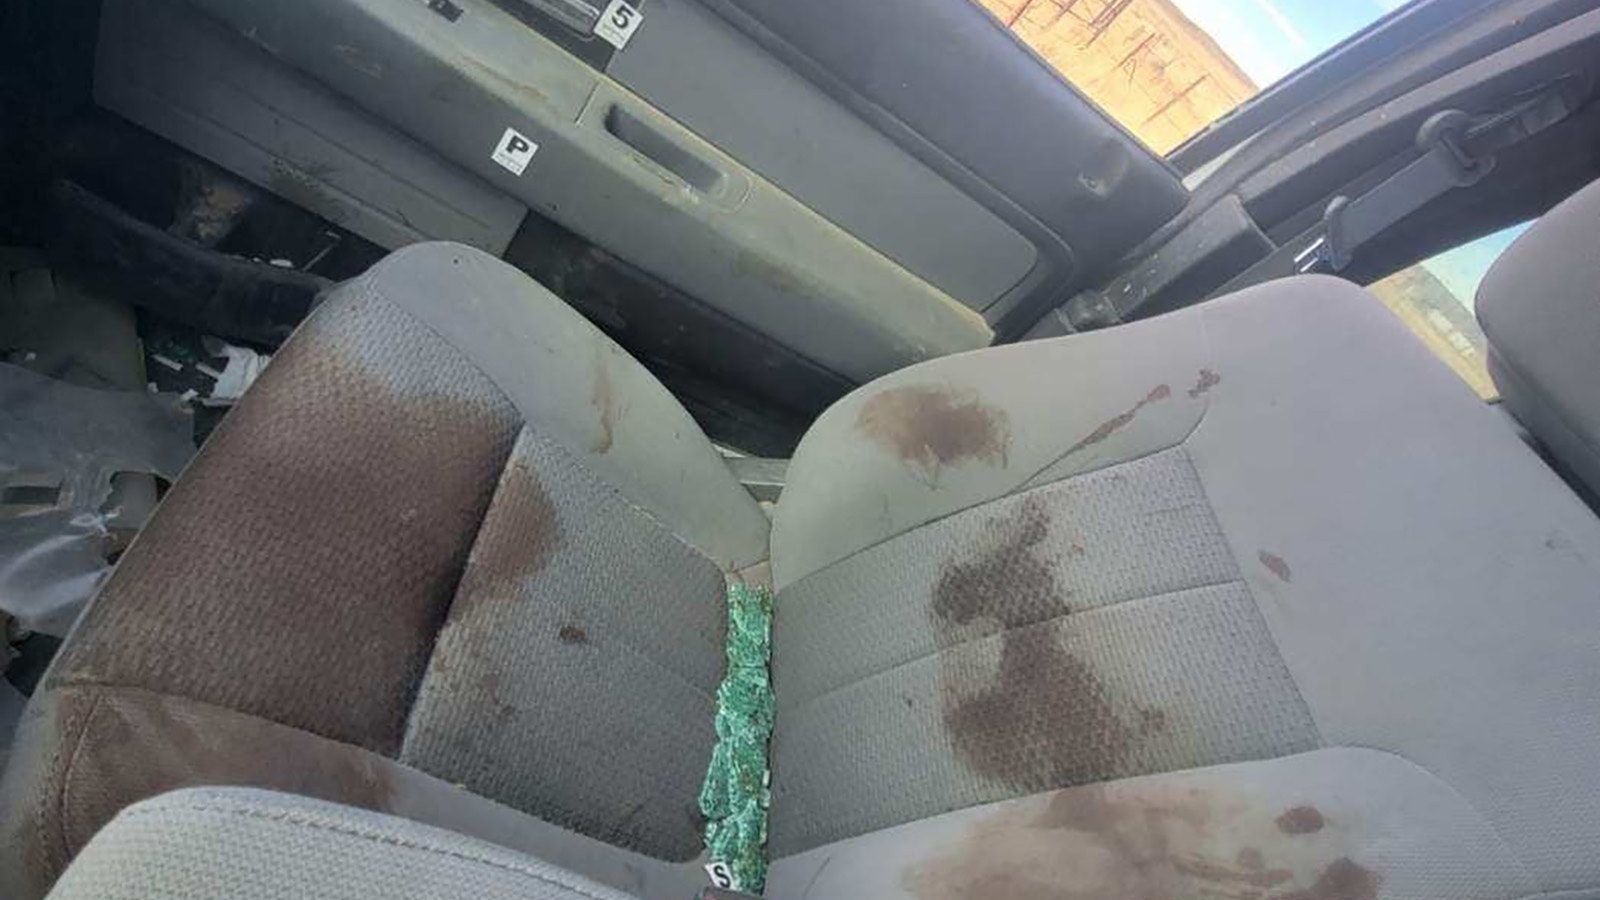 The bloody interior of Marvin and Stephanie Bagley’s truck, after Marvin’s uncle allegedly gunned them both down inside of it near Bairoil last month.